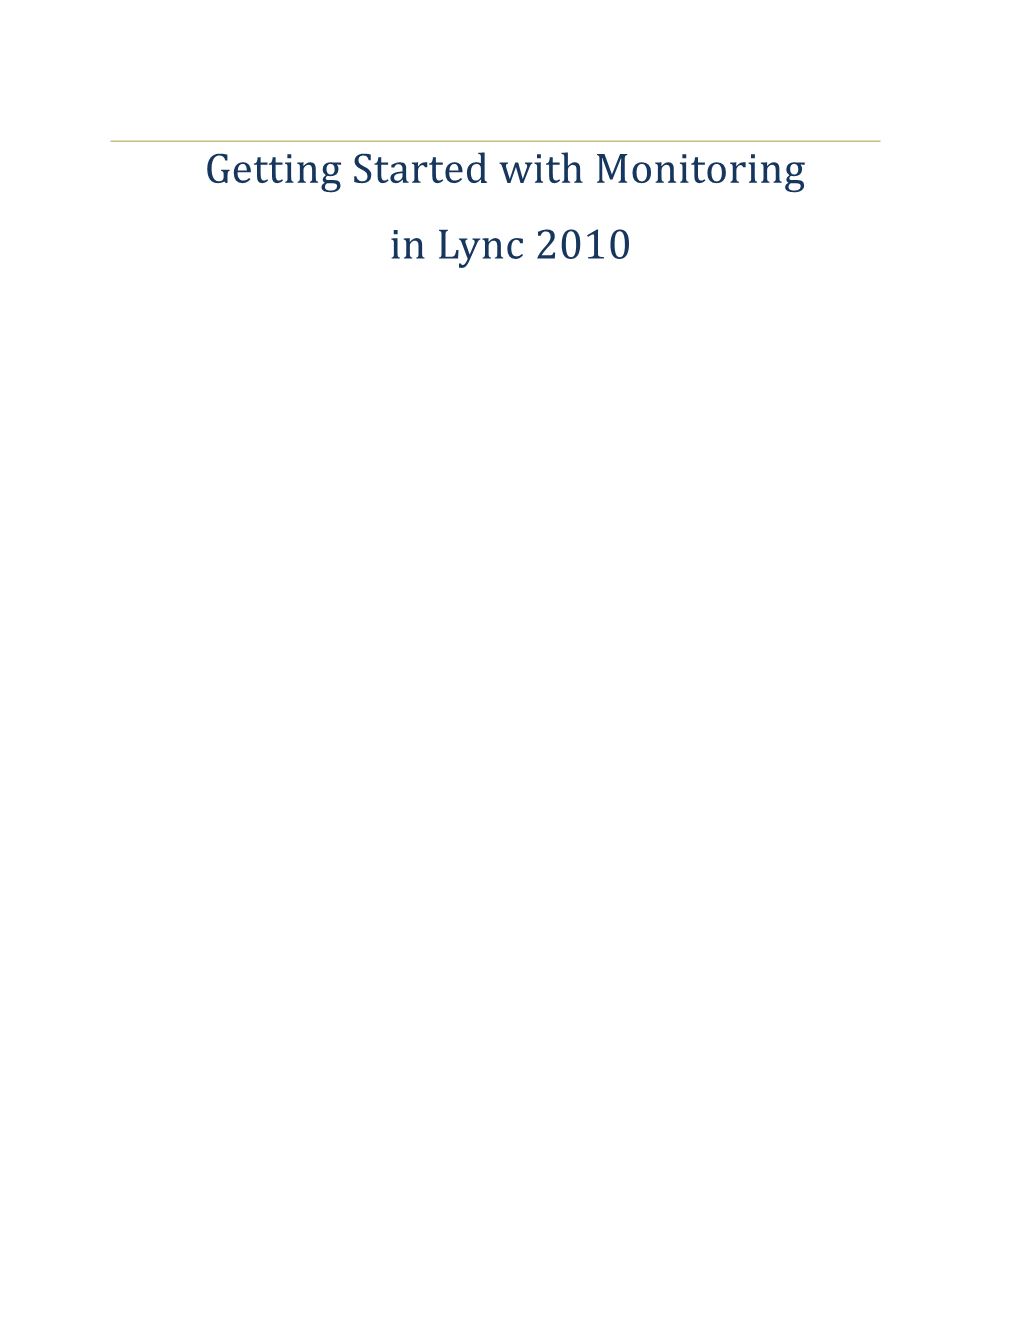 Getting Started with Monitoring